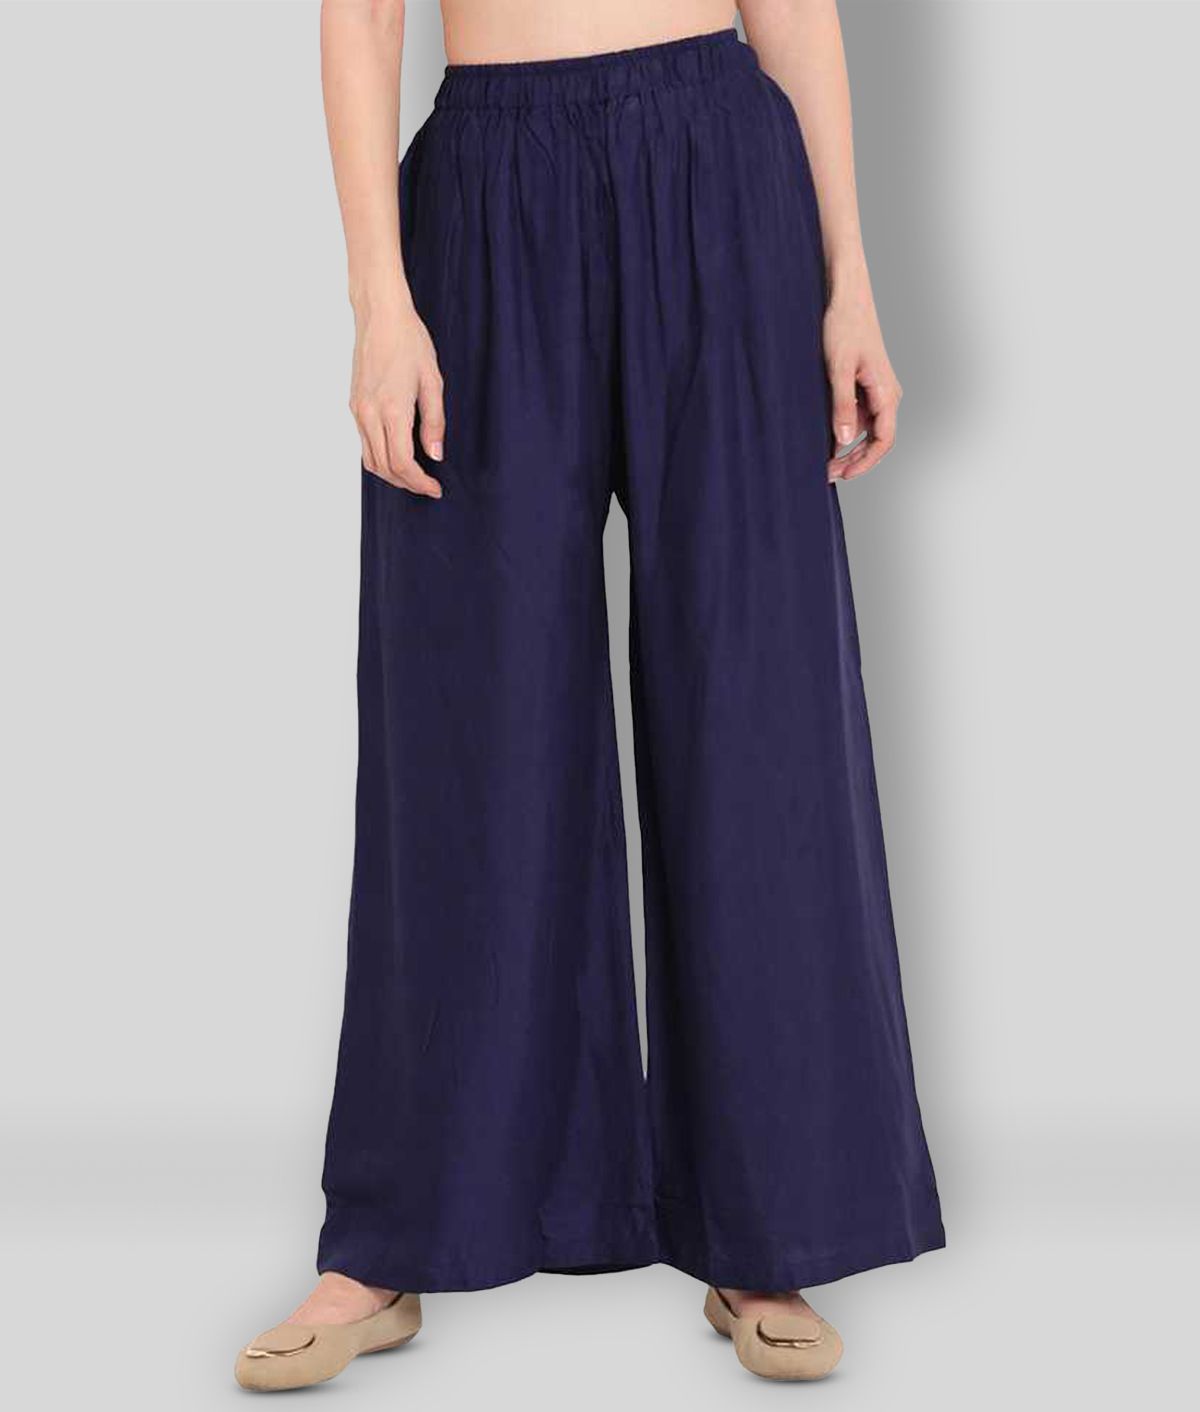     			R L F - Navy Blue Rayon Wide leg Women's Palazzos ( Pack of 1 )